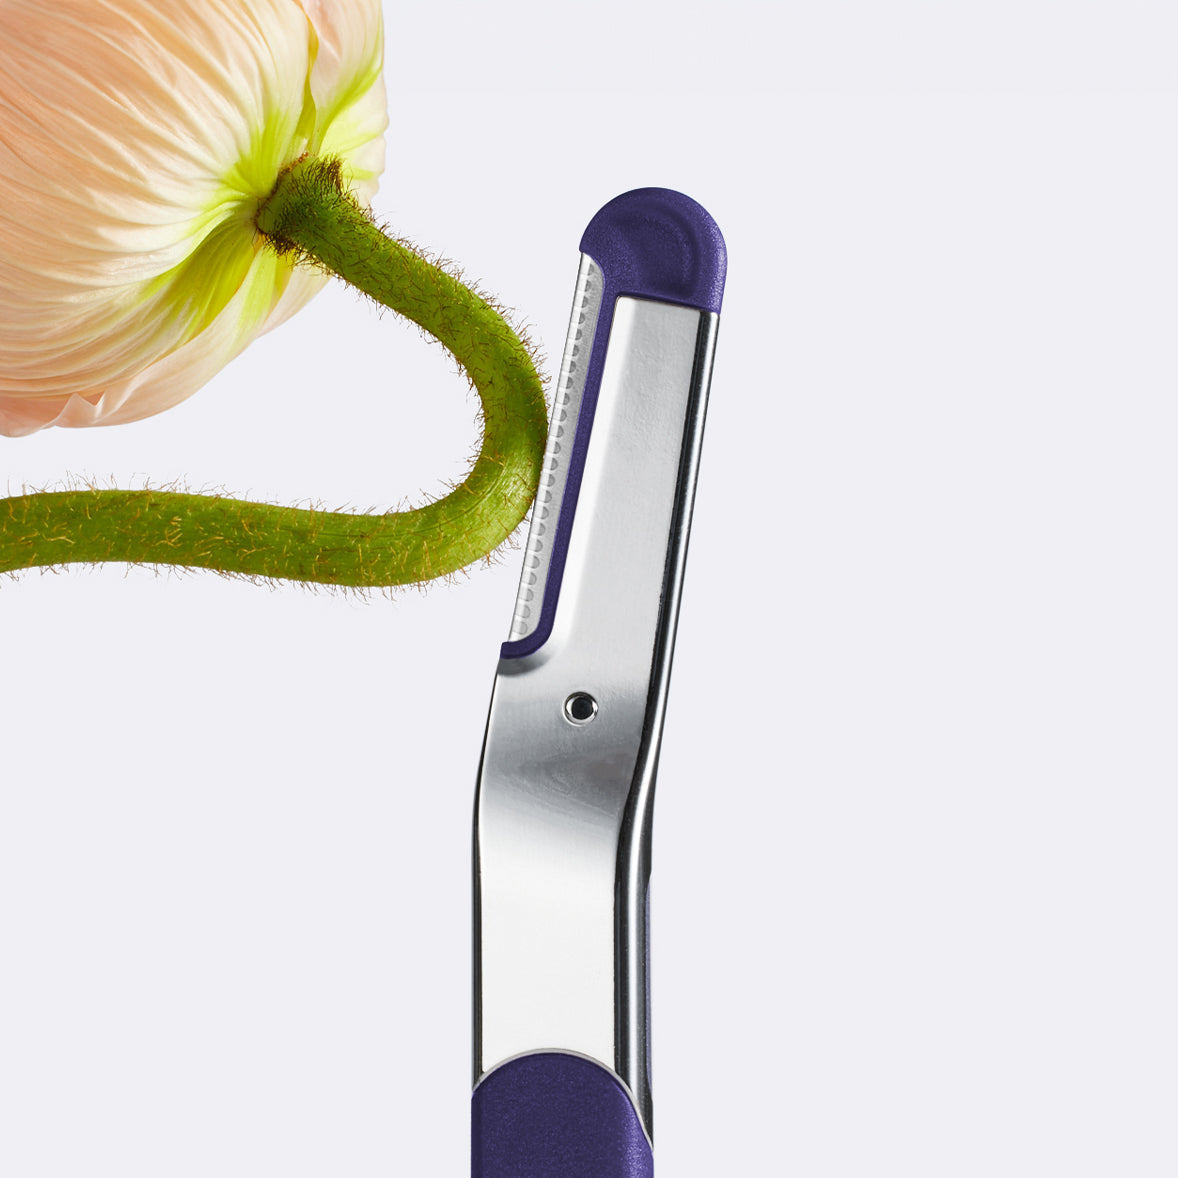 Flamingo Refillable Dermaplane Razor held against the stem of a ranunculus flower which has peach-fuzz like texture